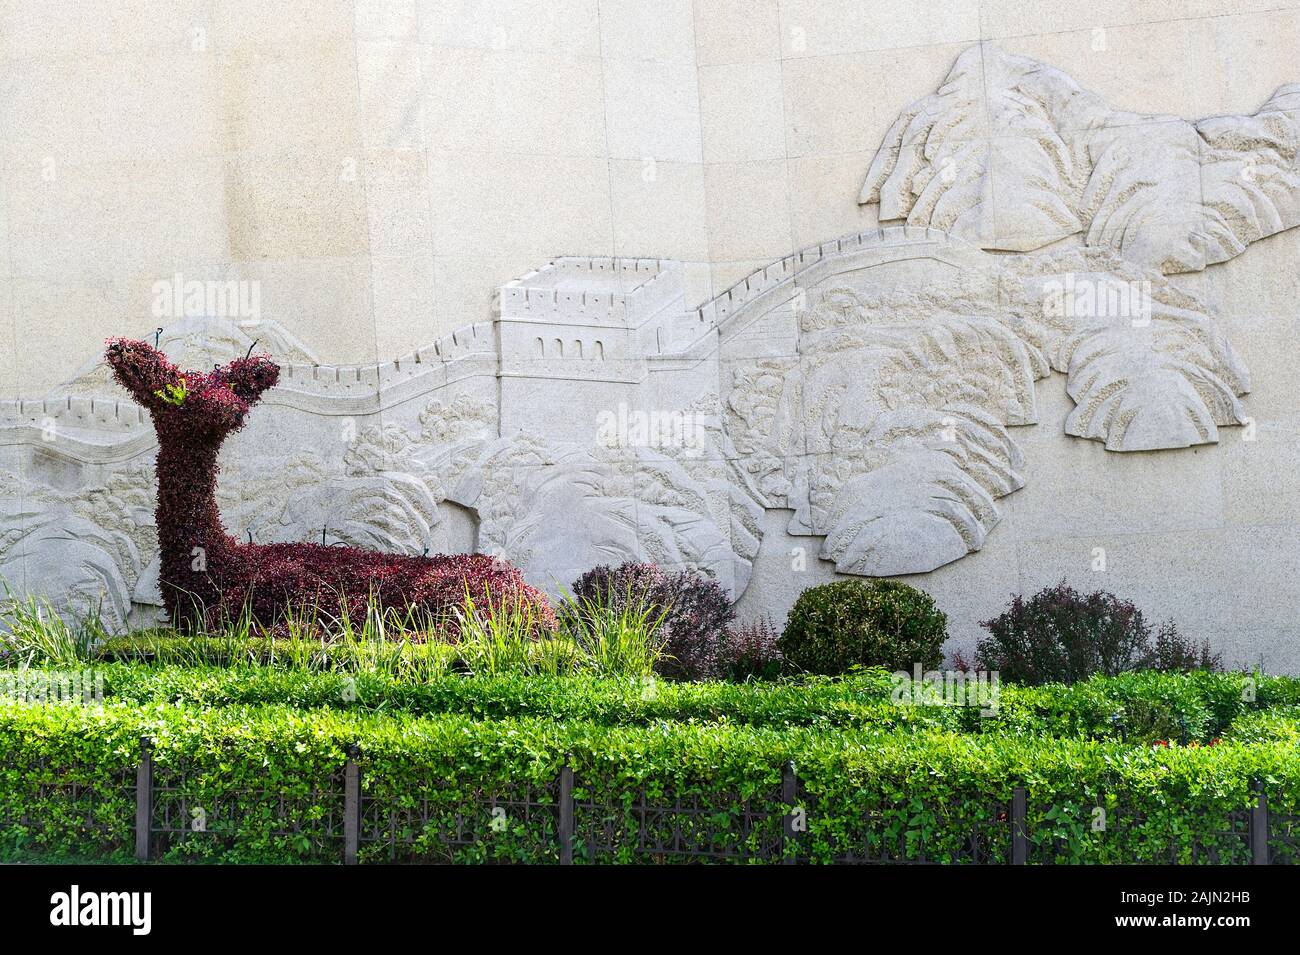 At the Badaling site of the Great Wall of China, a sculpted shrub deer sits before a wall carving depicting one of the 7 Wonders of the World. Stock Photo